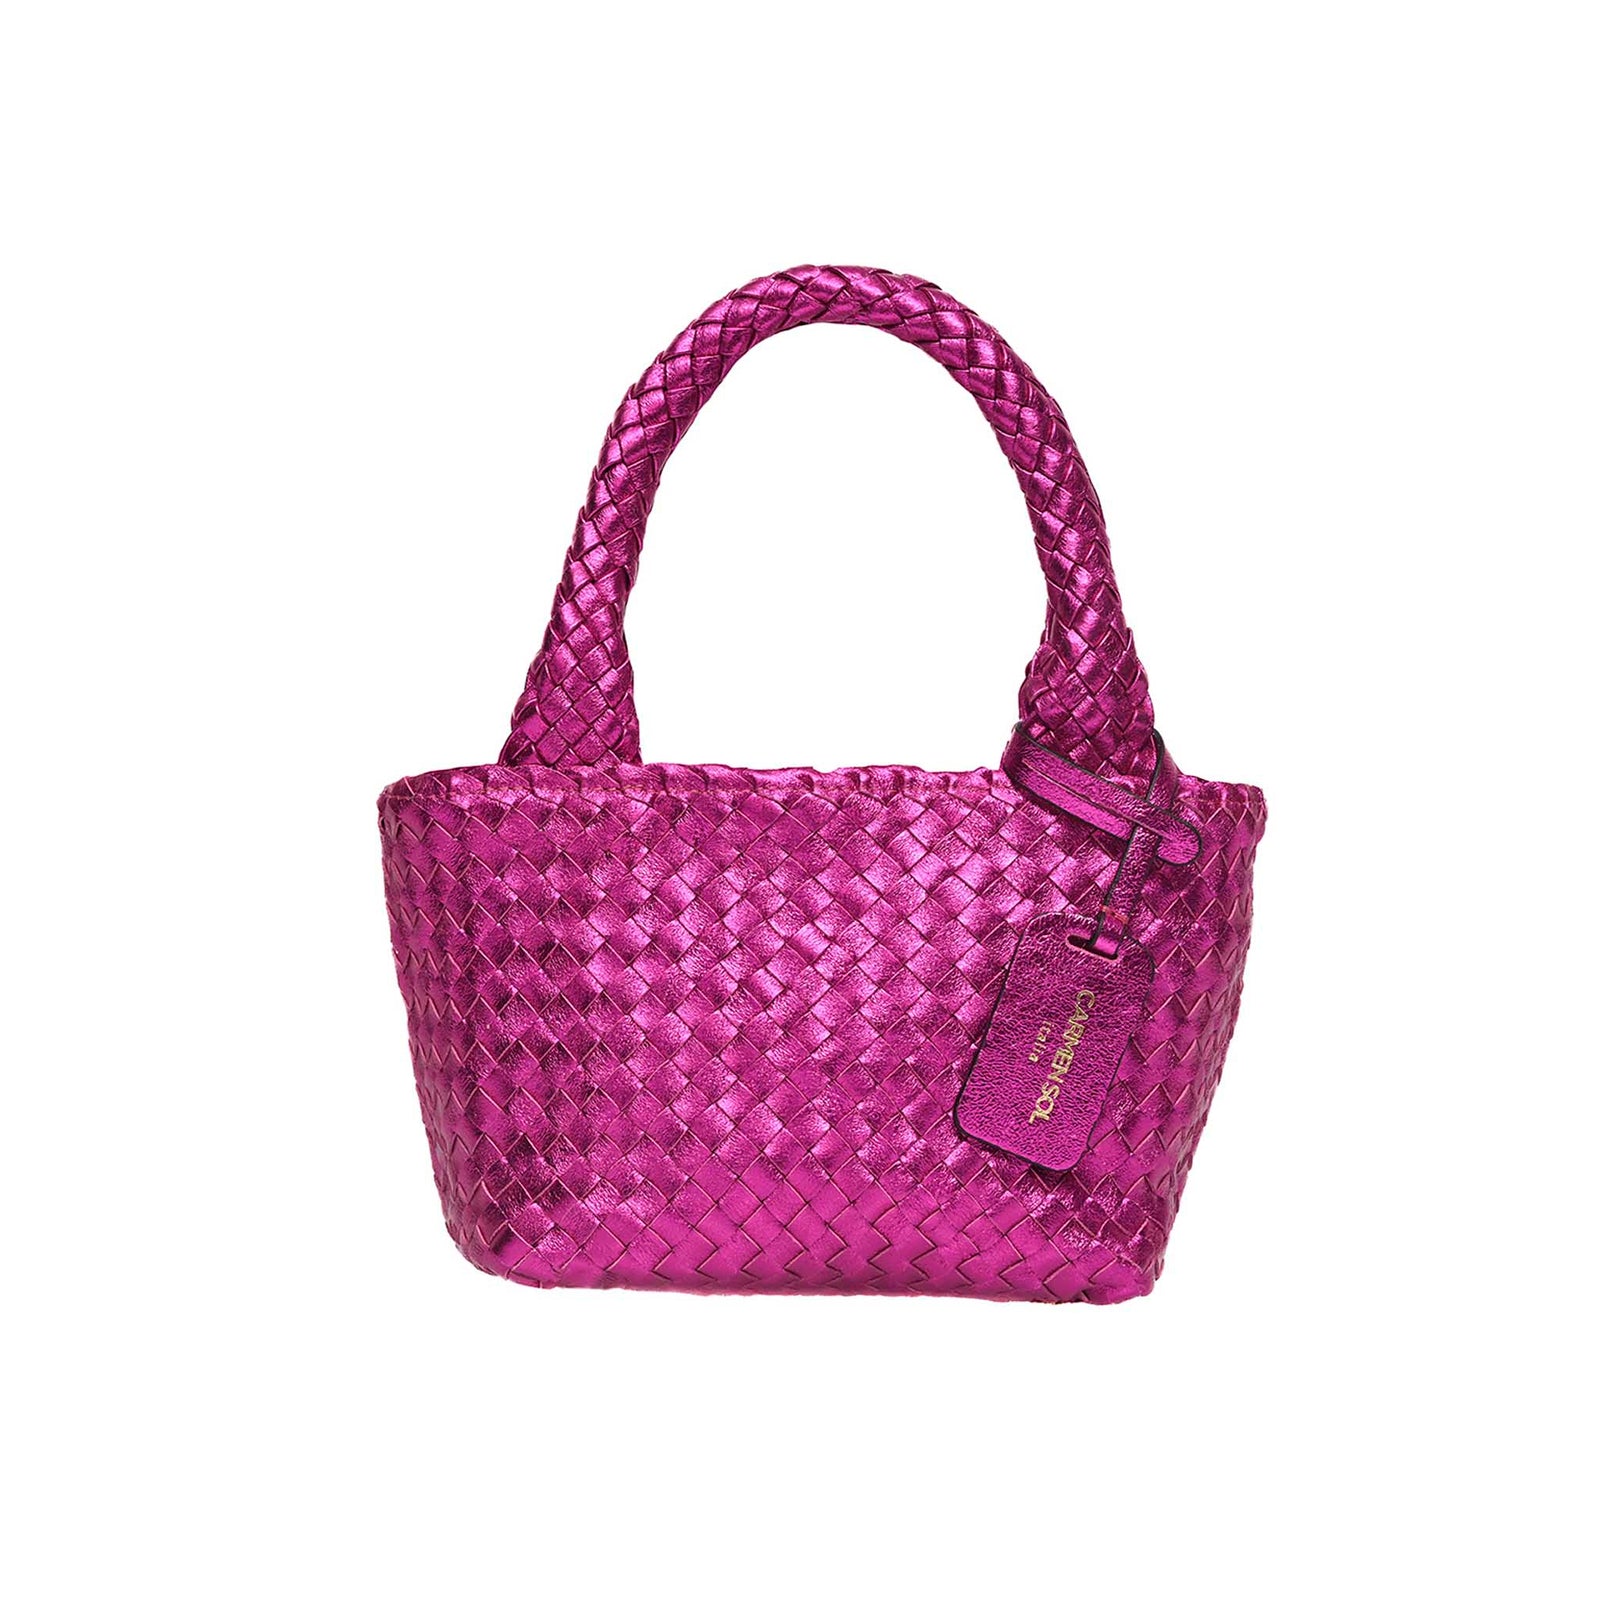 Mini leather bag purple in color best for shopping lovers "Italia" collection from Carmen Sol